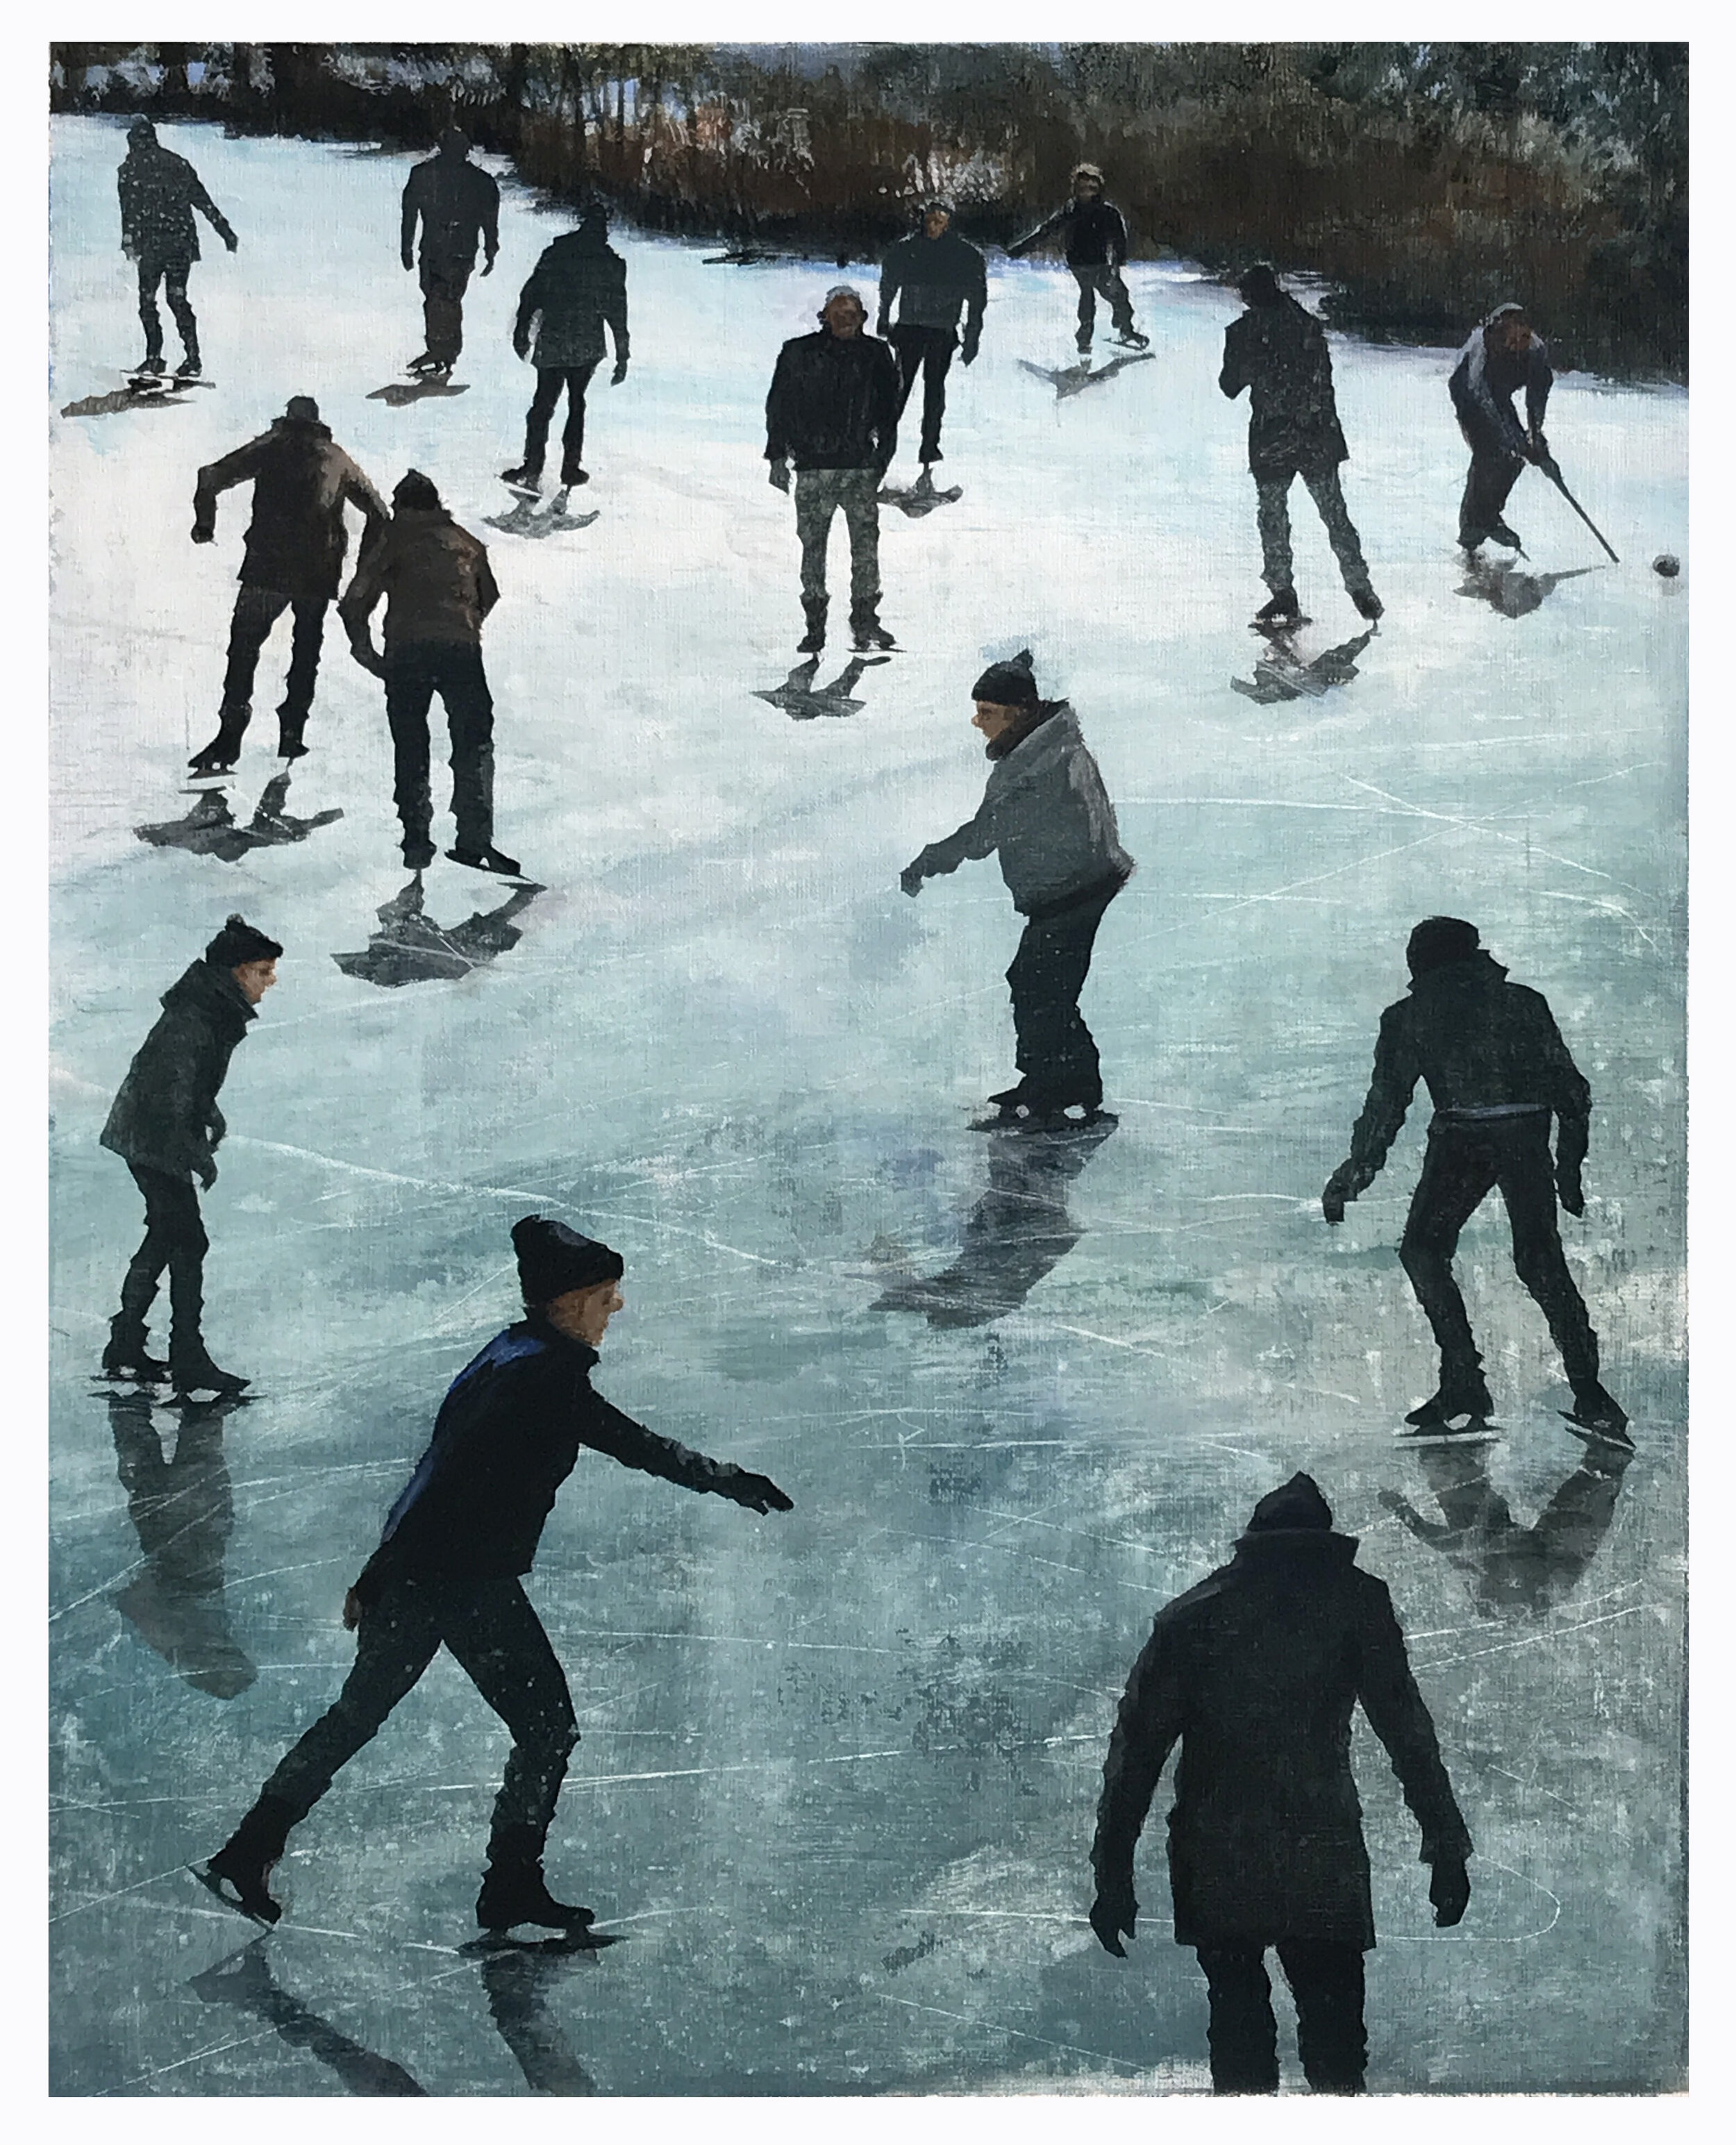  Skaters 2 24 x 19 inches (60 x 48 cm) Acrylic on linen 2021 